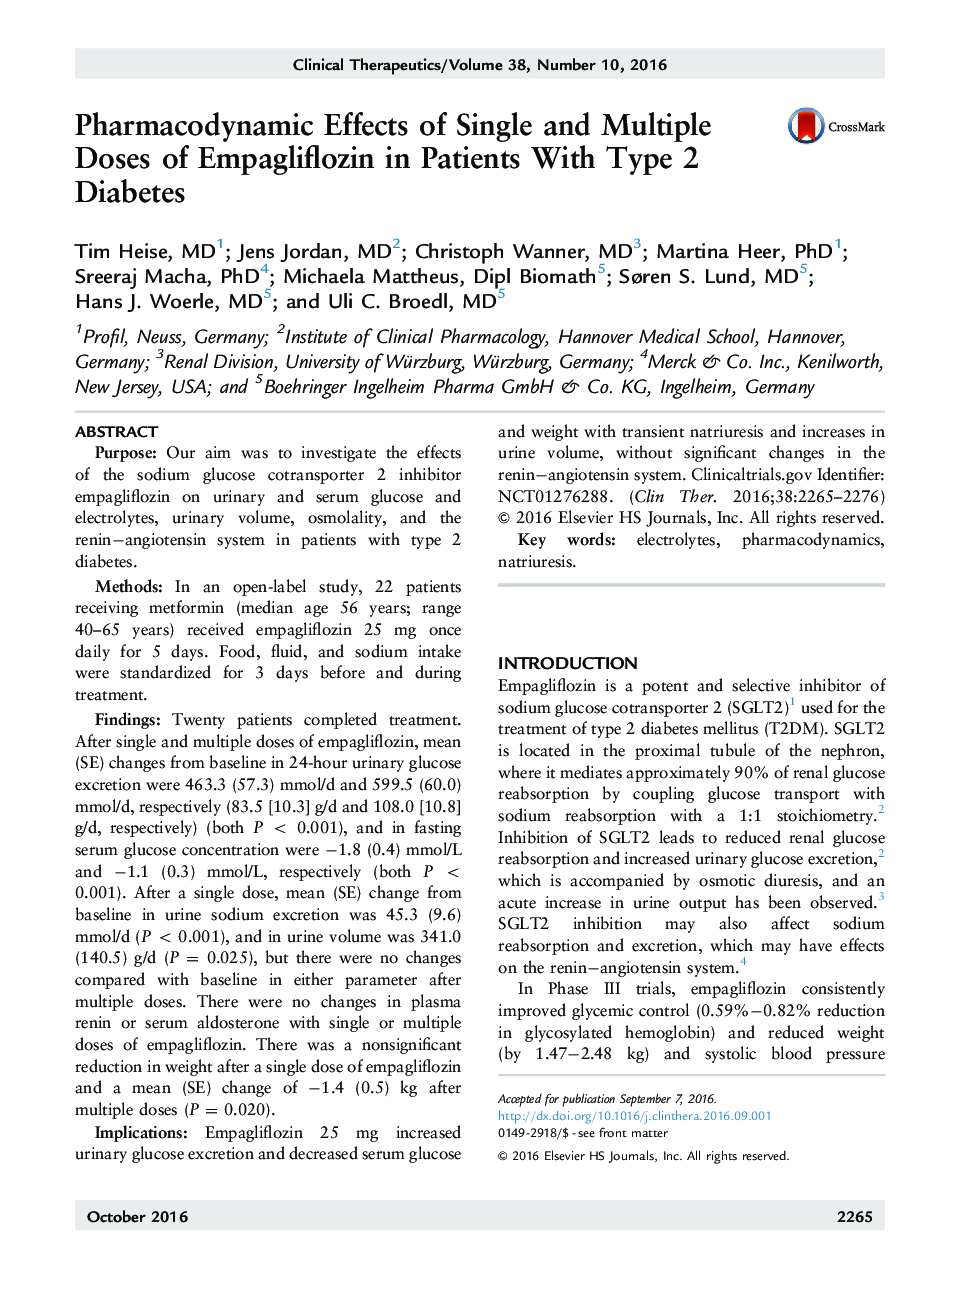 Pharmacodynamic Effects of Single and Multiple Doses of Empagliflozin in Patients With Type 2 Diabetes